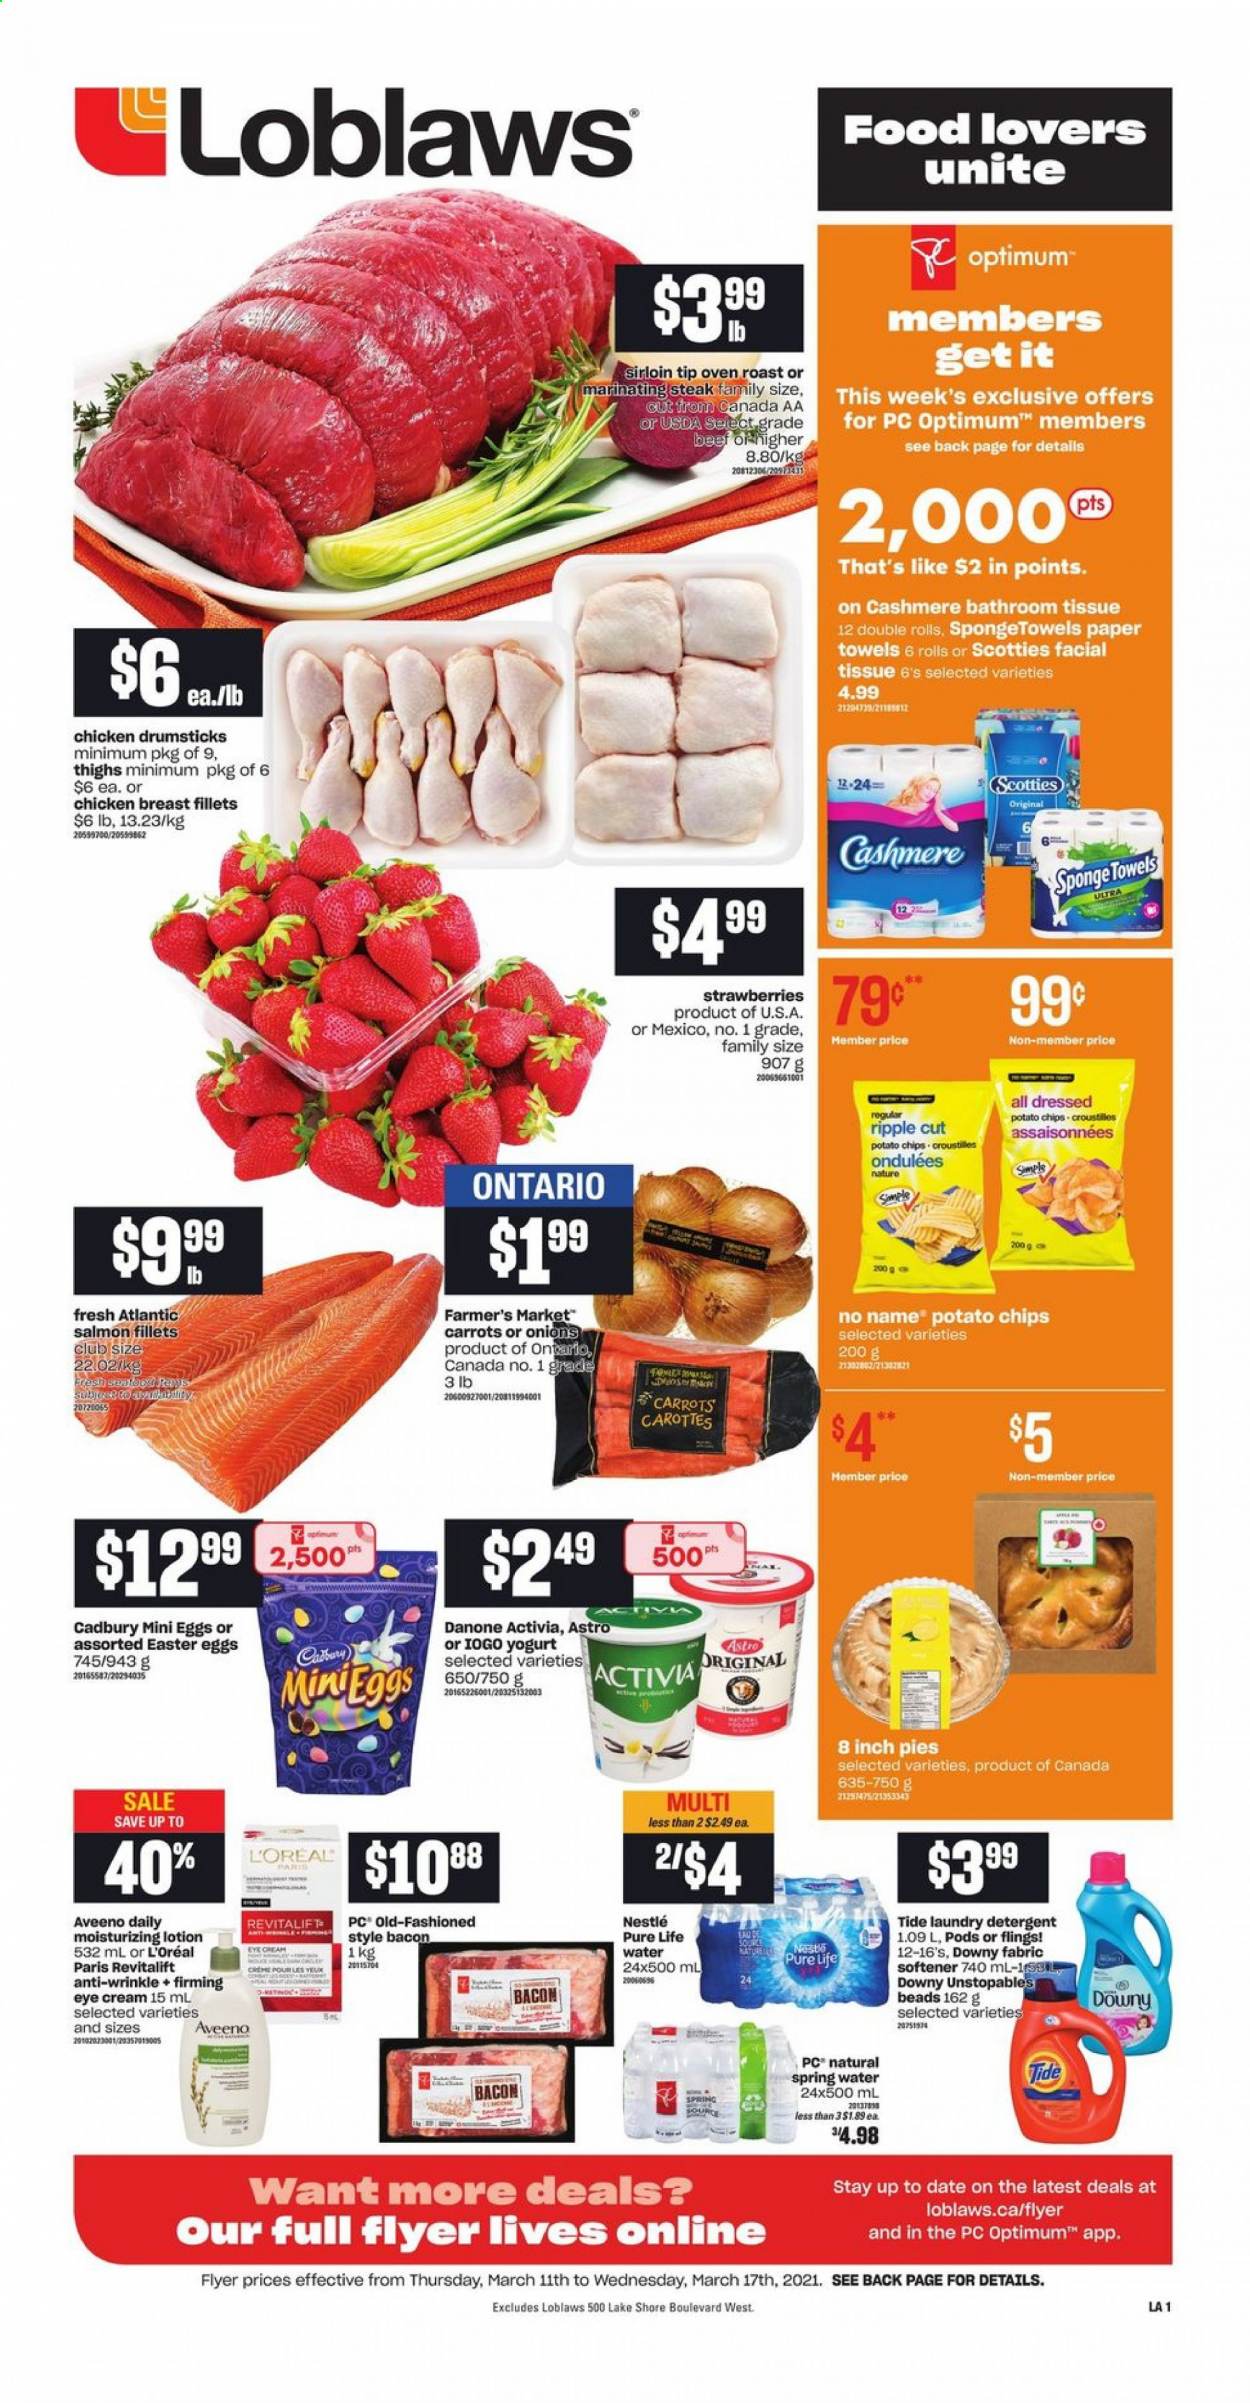 thumbnail - Loblaws Flyer - March 11, 2021 - March 17, 2021 - Sales products - carrots, onion, strawberries, salmon, salmon fillet, No Name, bacon, yoghurt, Activia, Cadbury, potato chips, spring water, Pure Life Water, chicken breasts, chicken drumsticks, chicken, Aveeno, bath tissue, kitchen towels, paper towels, Tide, Unstopables, fabric softener, laundry detergent, Downy Laundry, L’Oréal, eye cream, body lotion, Optimum, Danone, Nestlé, chips, steak. Page 1.